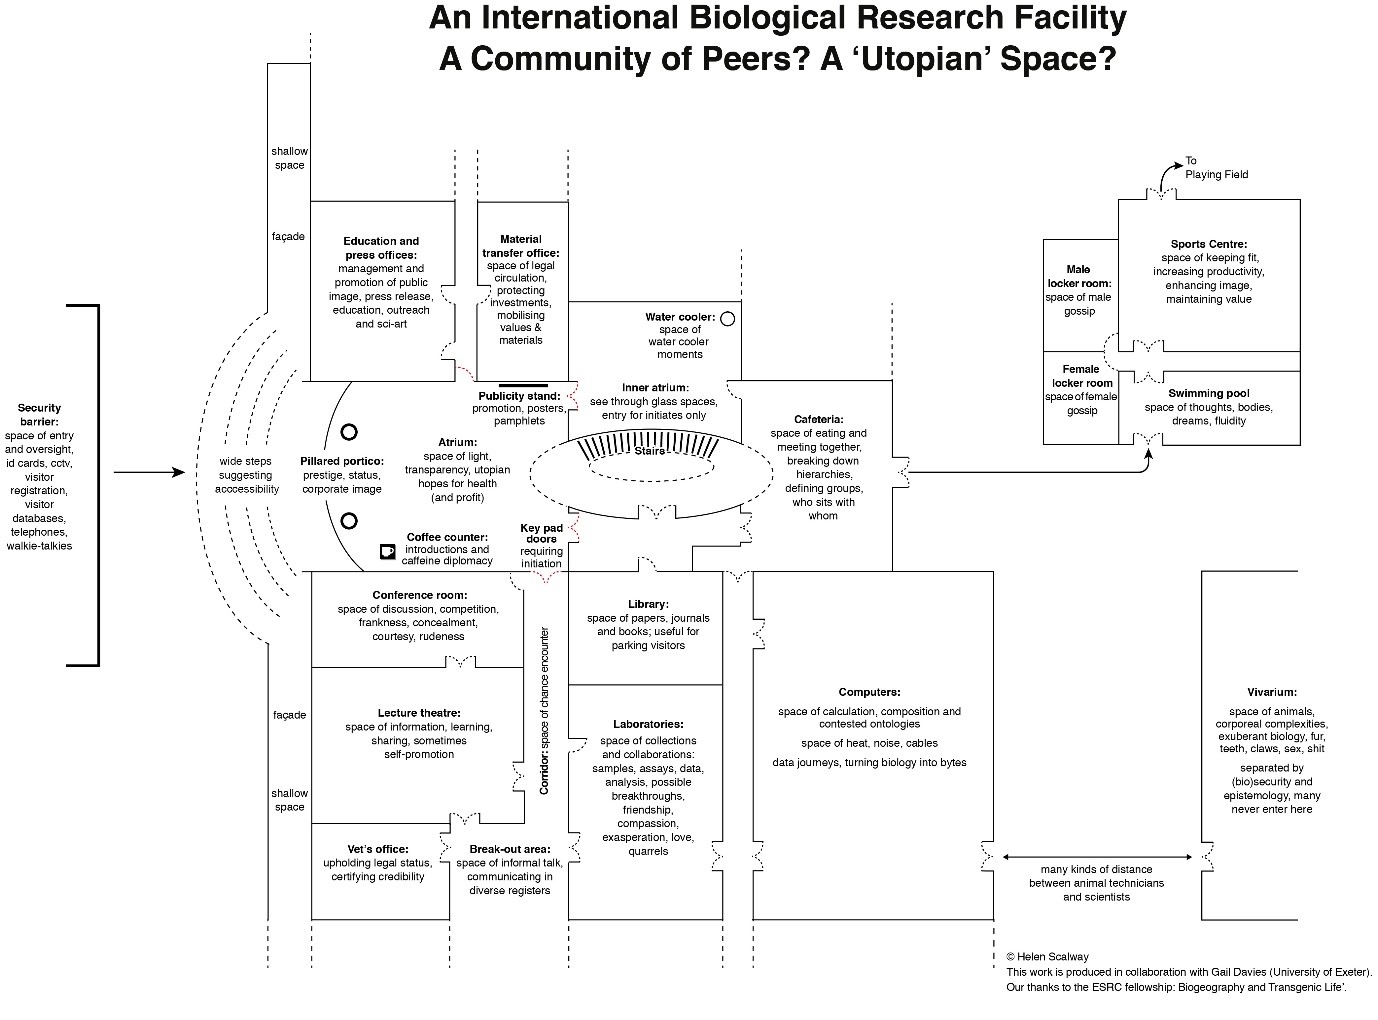 Chart produced by artist Helen Scalway representing the collaborations of science in a facility